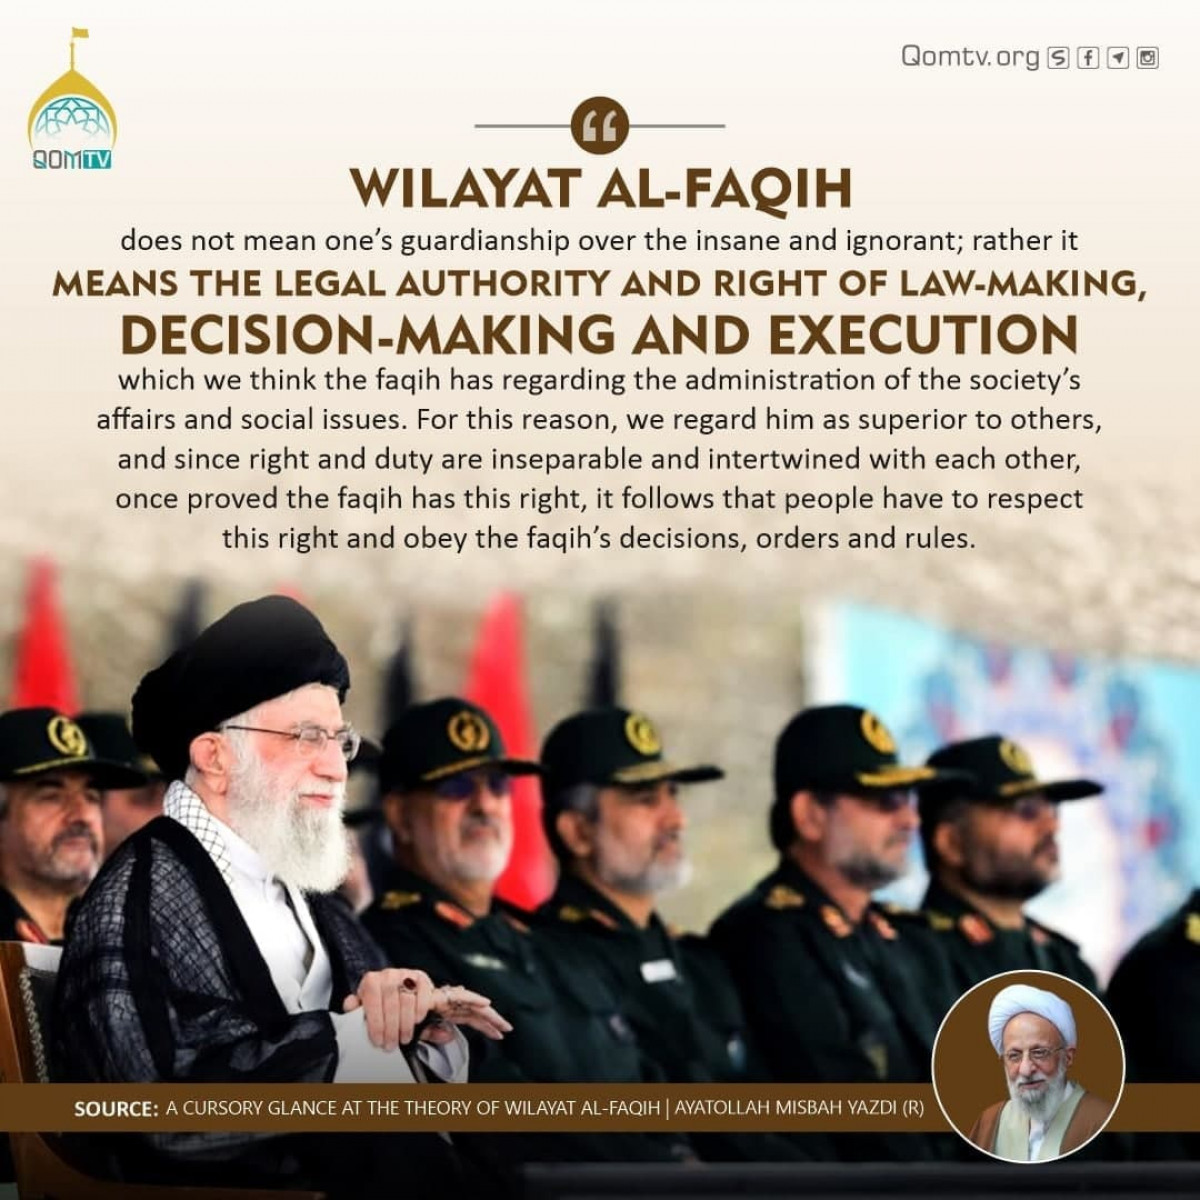 Wilayat al-faqih does not mean one’s guardianship over the insane and ignorant